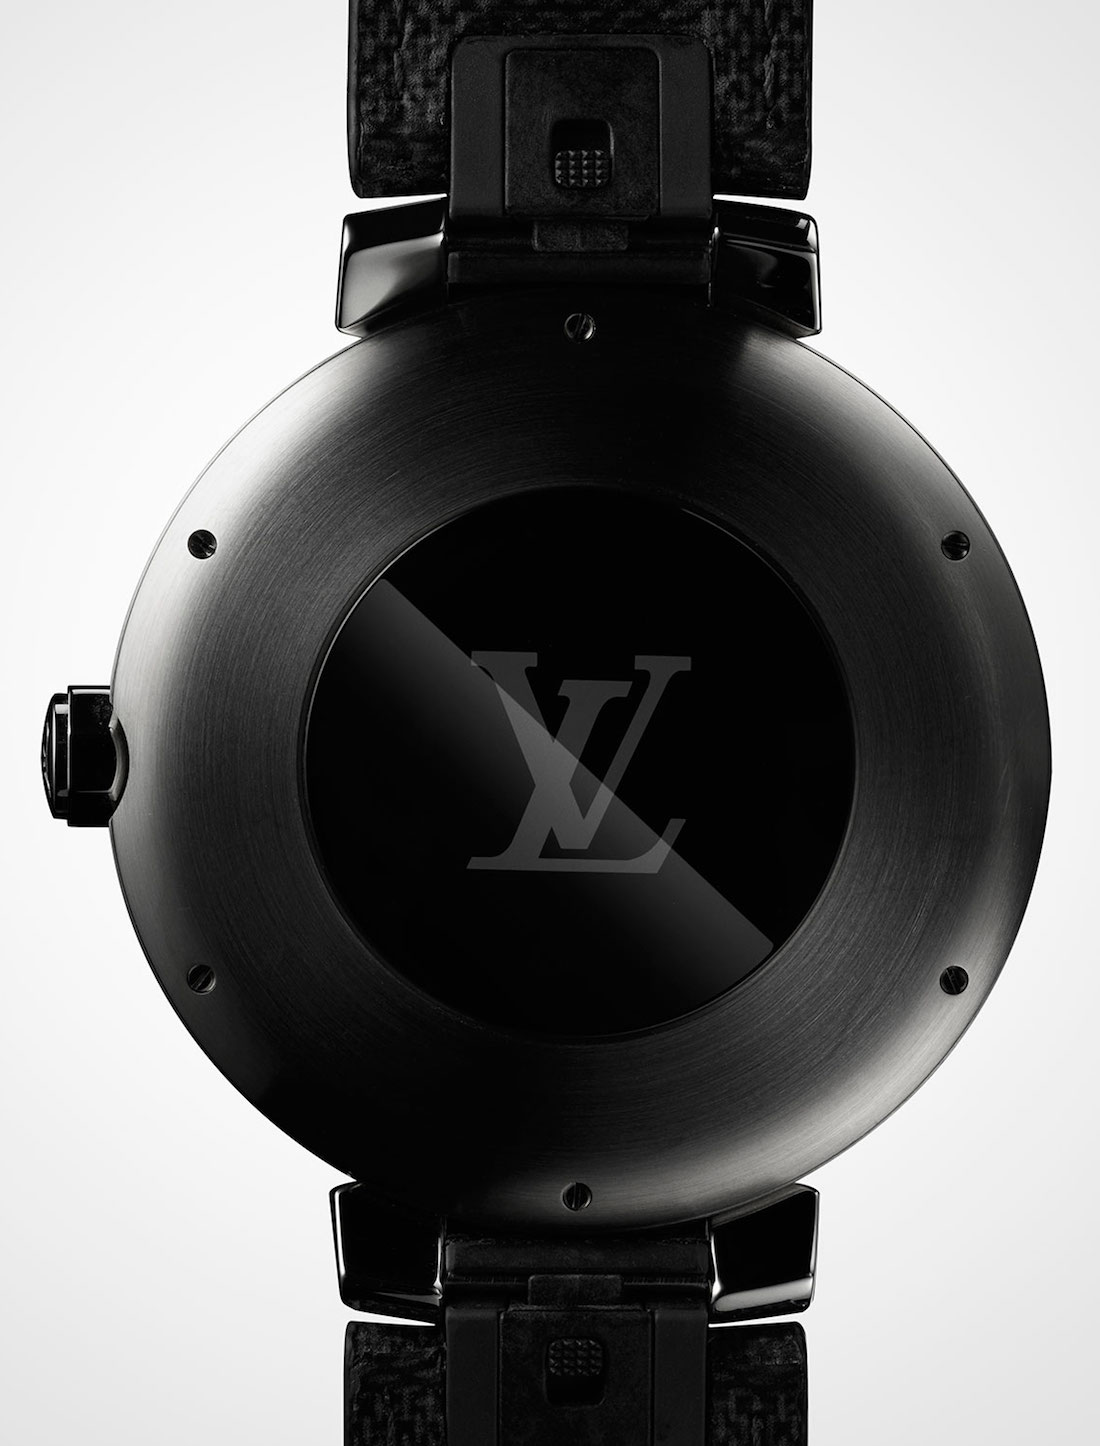 Louis Vuitton takes on wearable tech with the Tambour Horizon smartwatch